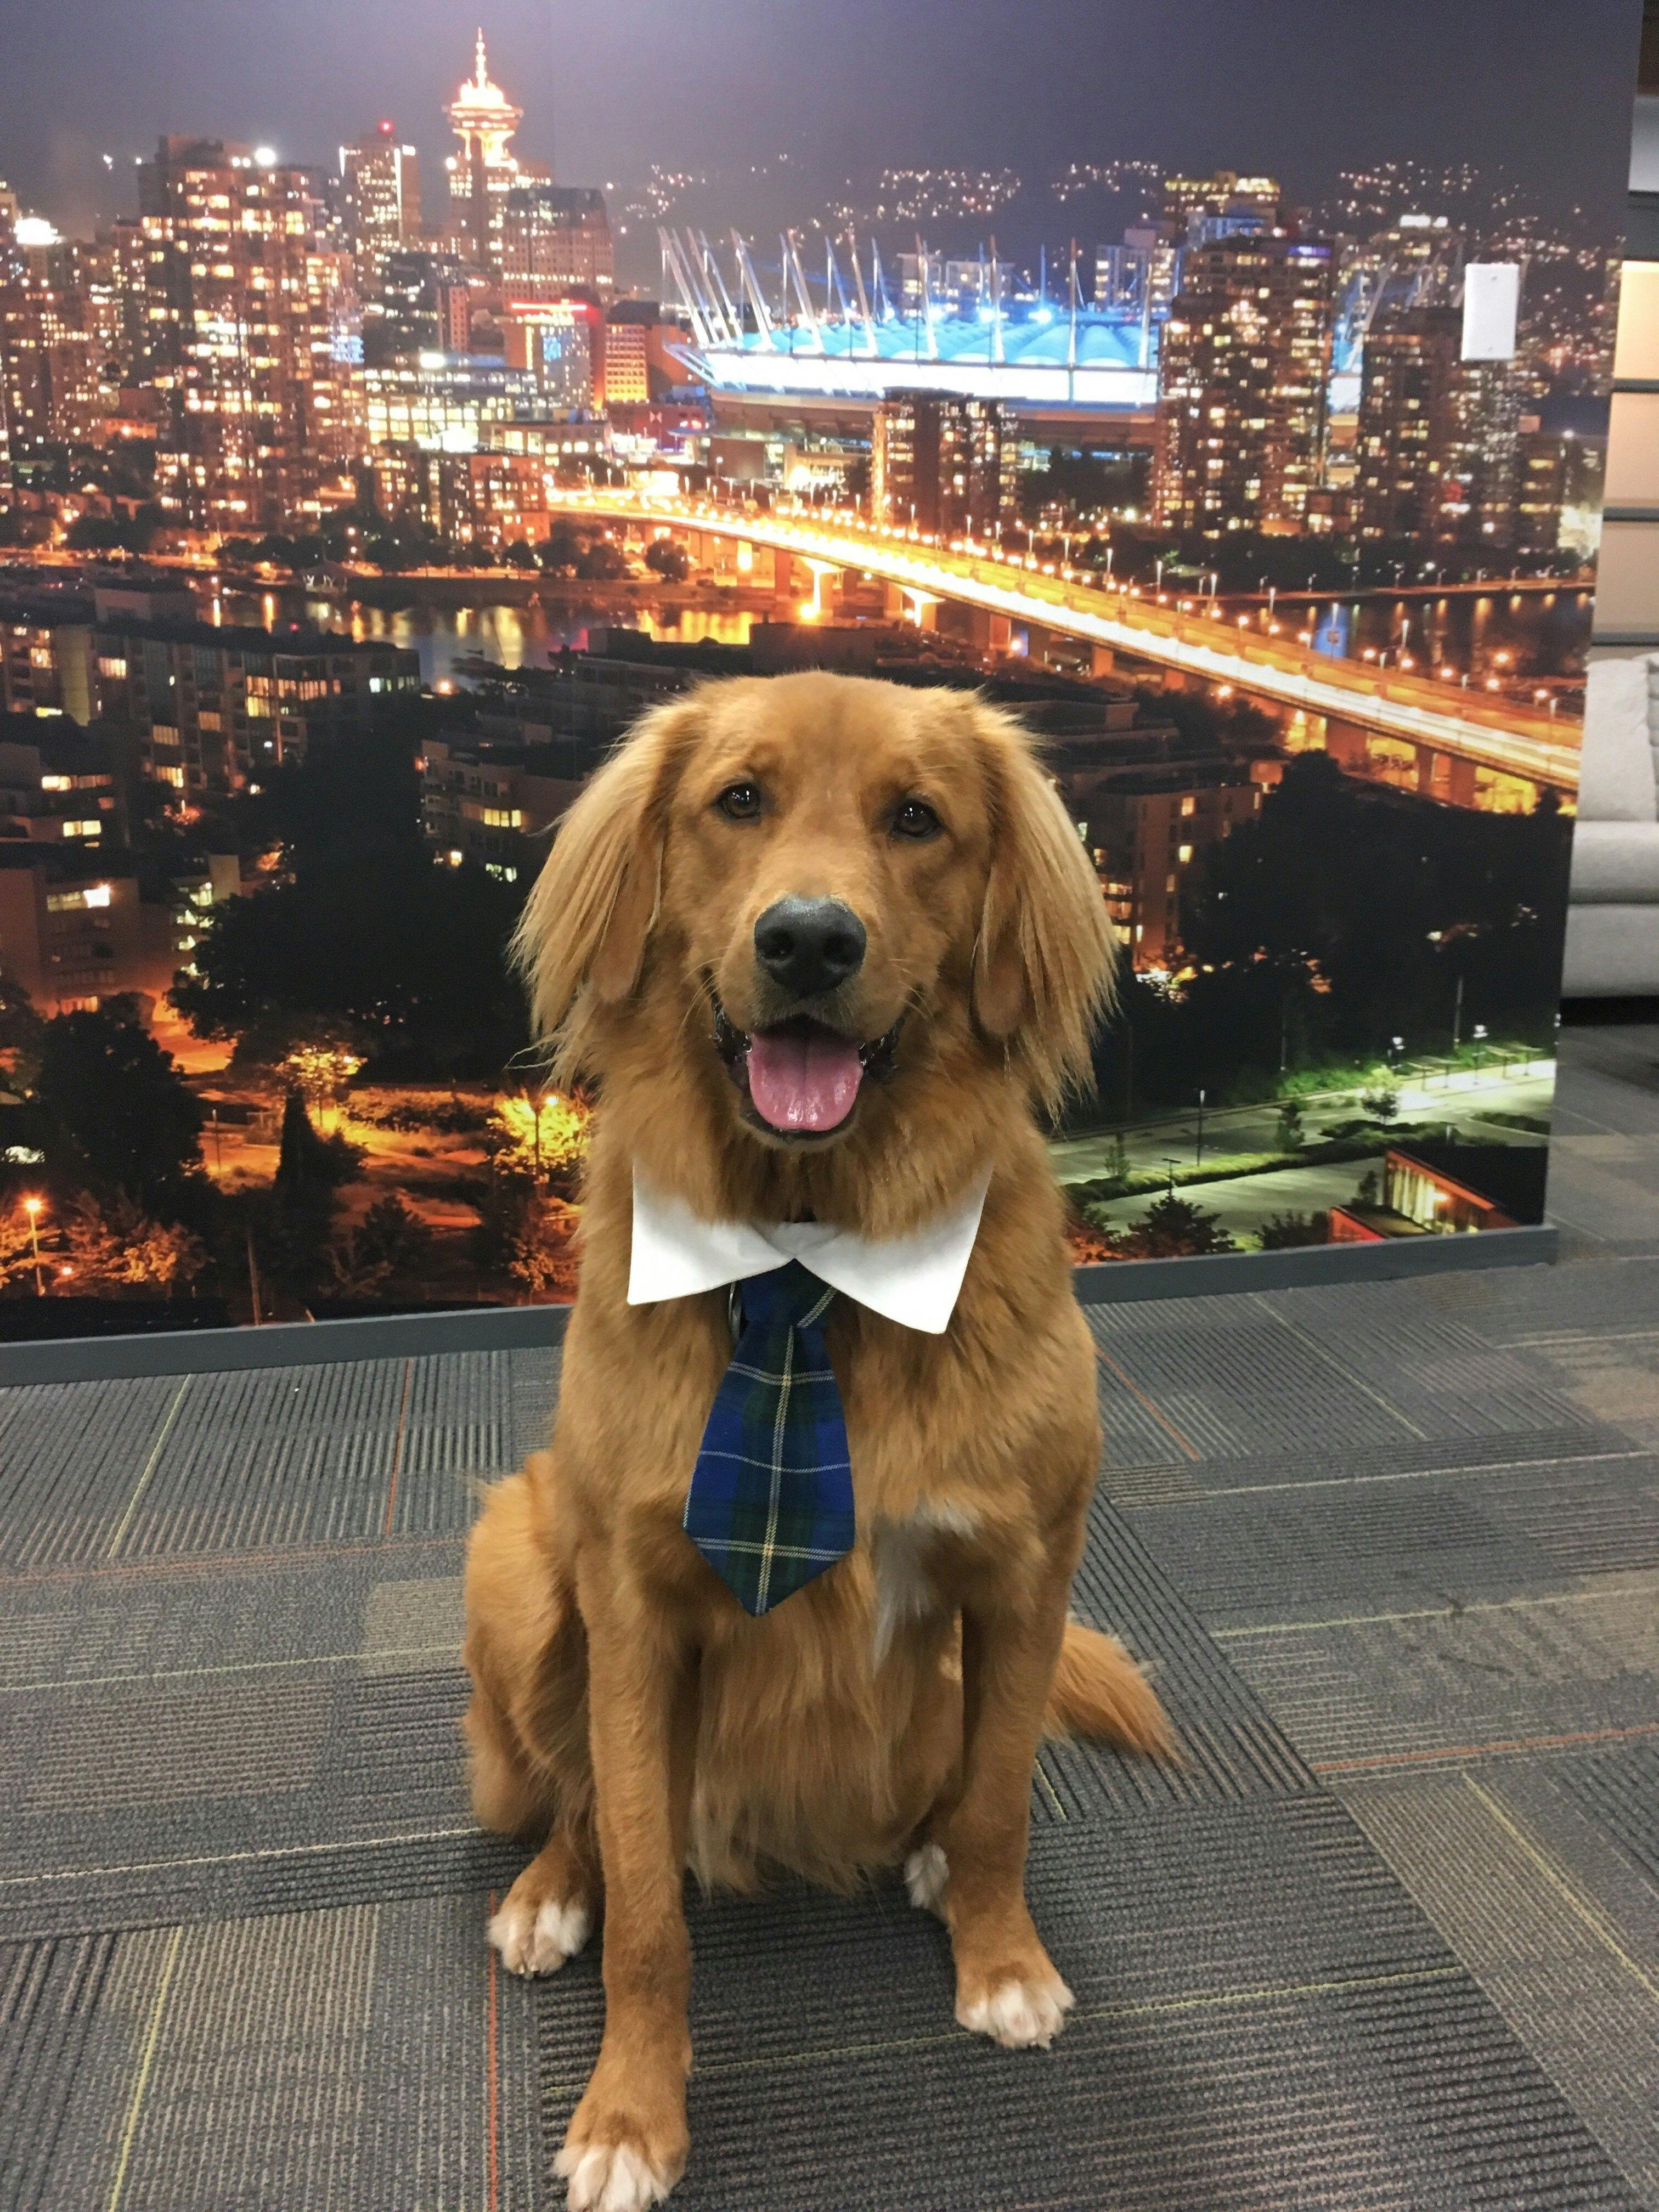 Finn the dog wearing a blue tie with white collar in the office